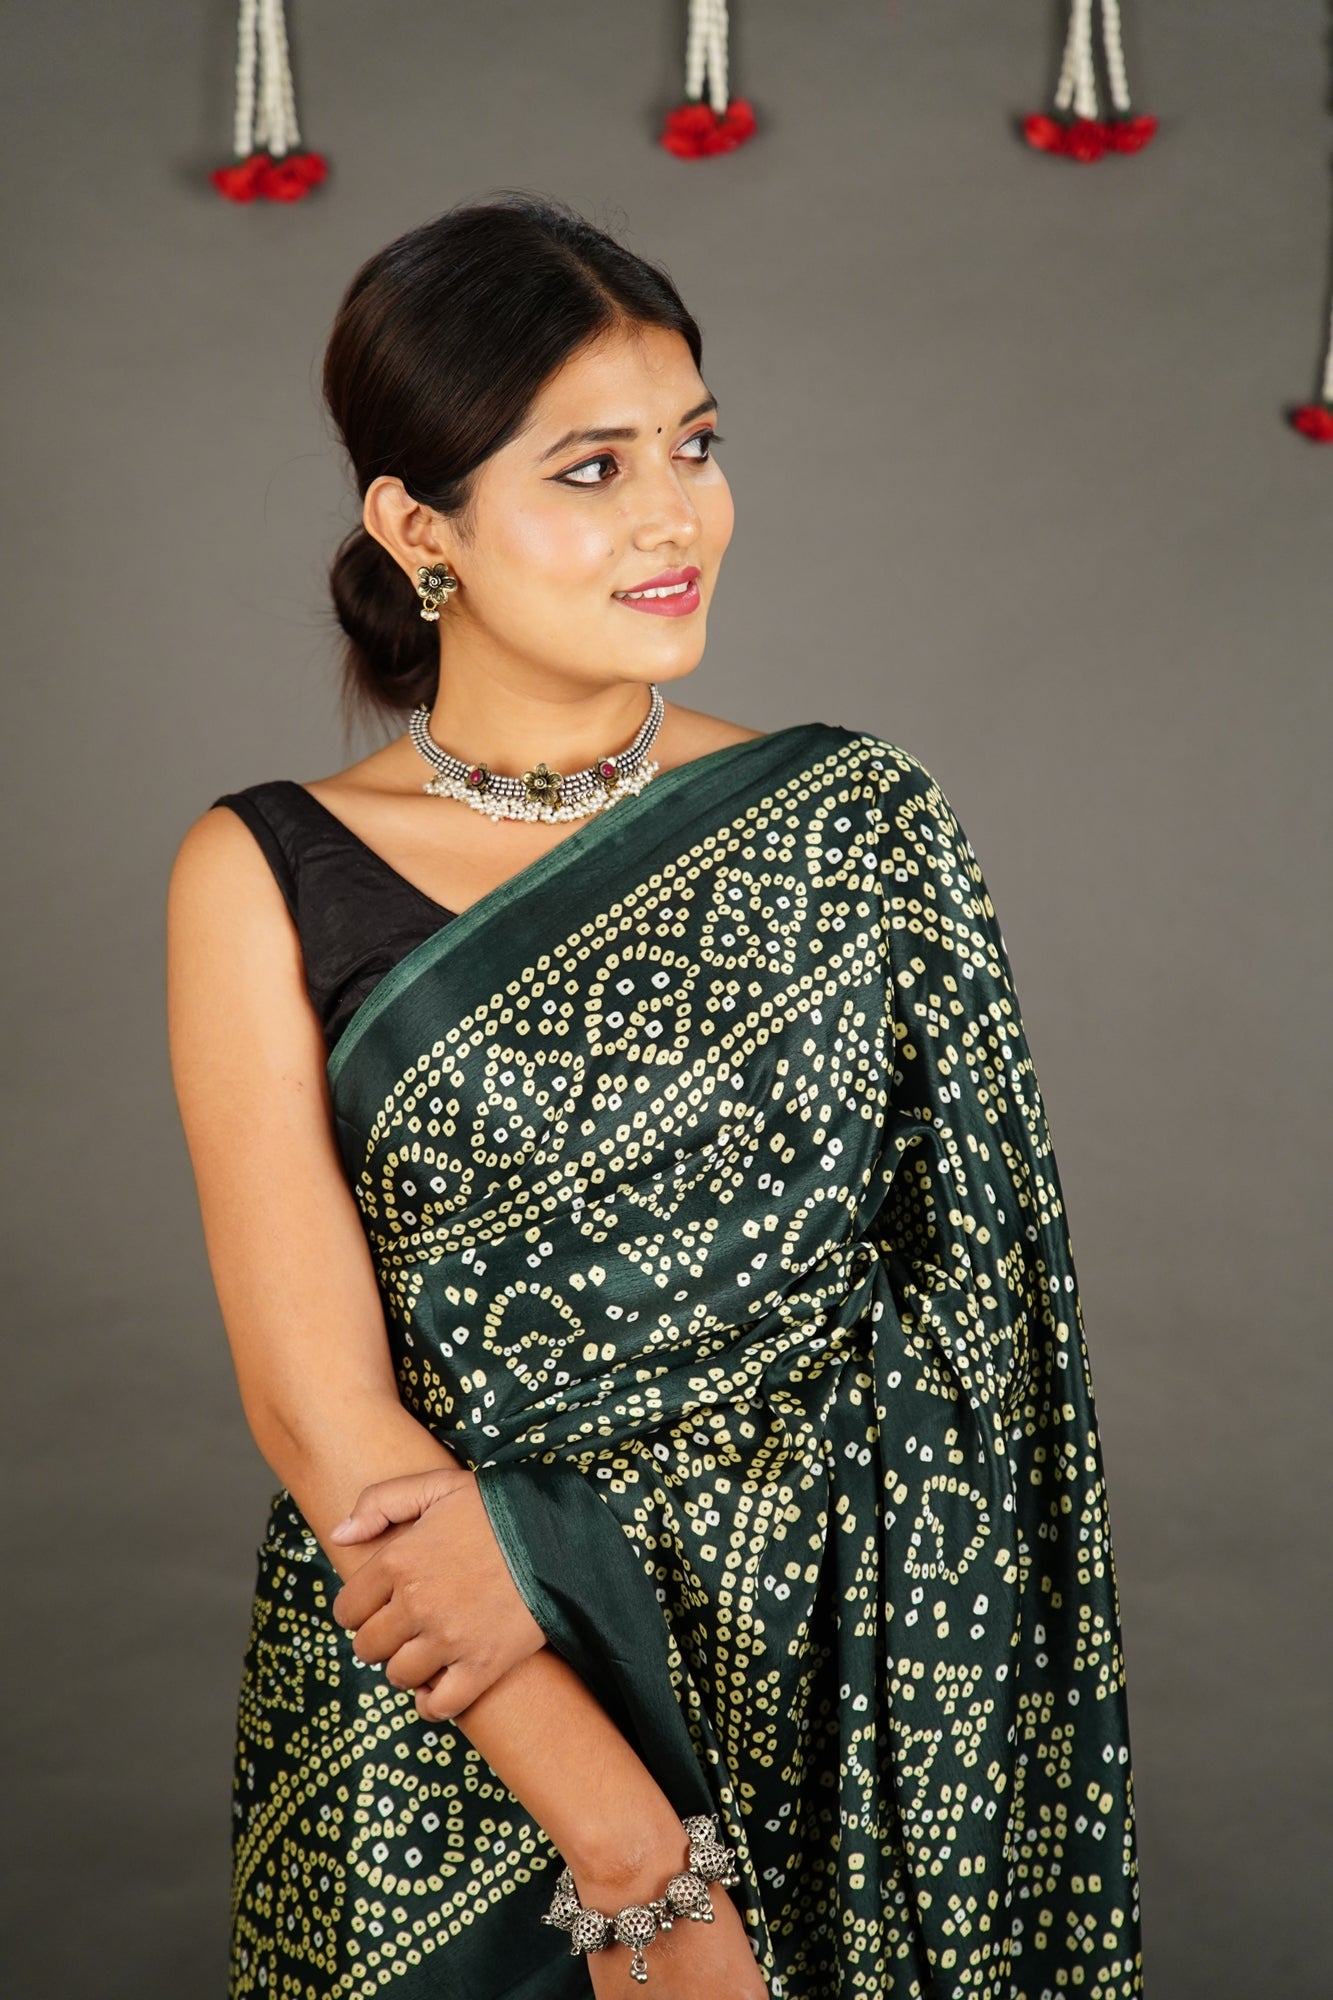 Ready To Wear Sacramento Green Bandhani Wrap in 1 minute saree With Readymade Blouse - Isadora Life Online Shopping Store